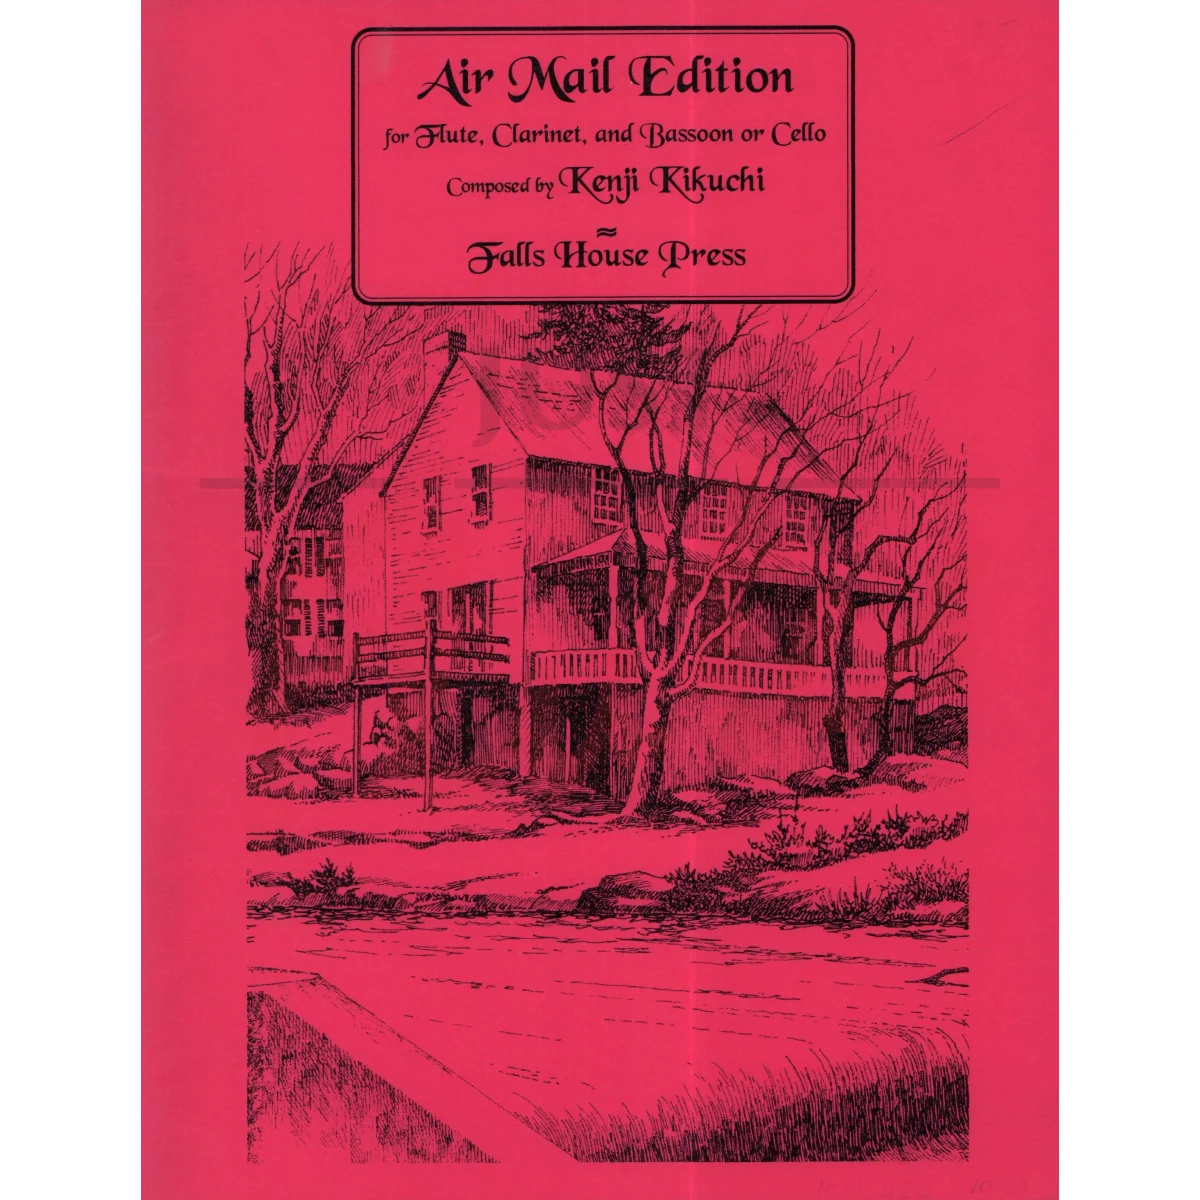 Air Mail Edition for Flute, Clarinet and Bassoon/Cello